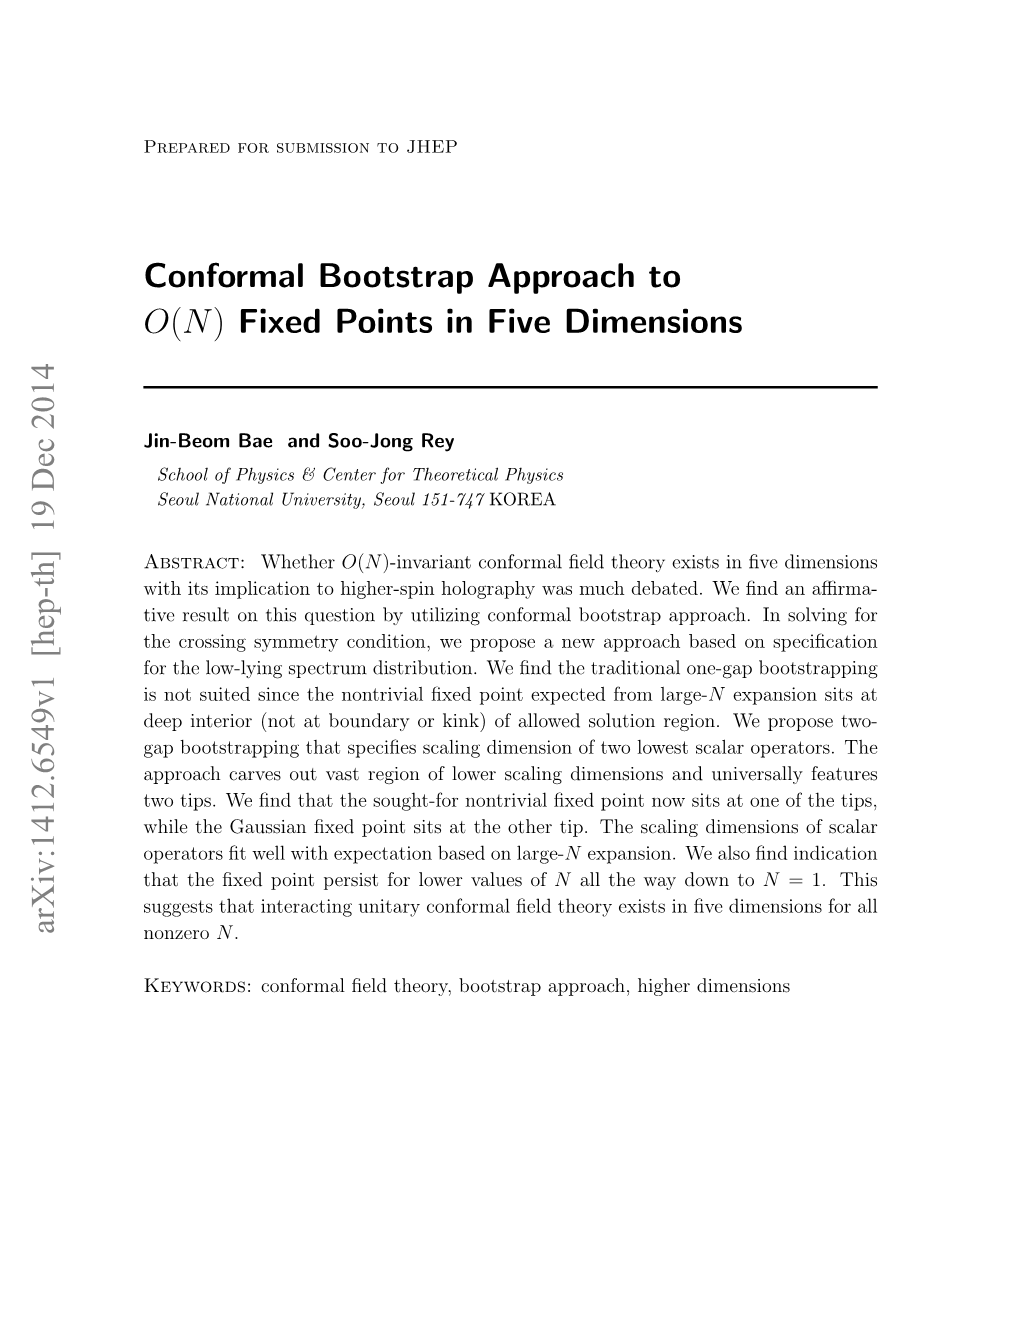 Conformal Bootstrap Approach to O(N) Fixed Points in Five Dimensions